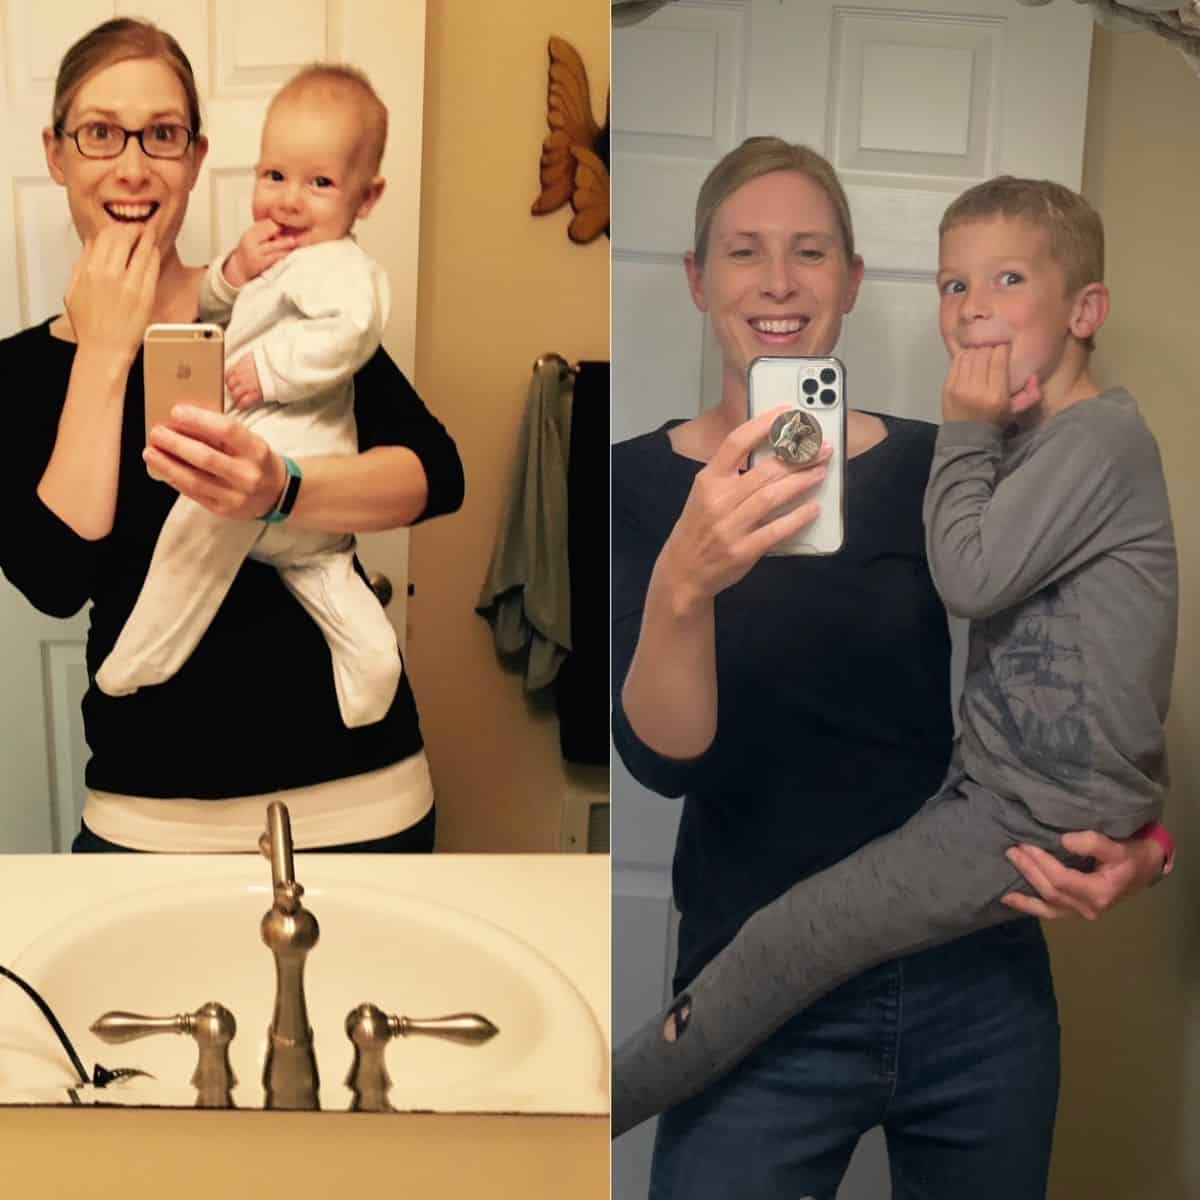 2 photos: a mom holding a baby and that same baby 6 years later being held by the mom in the same way.